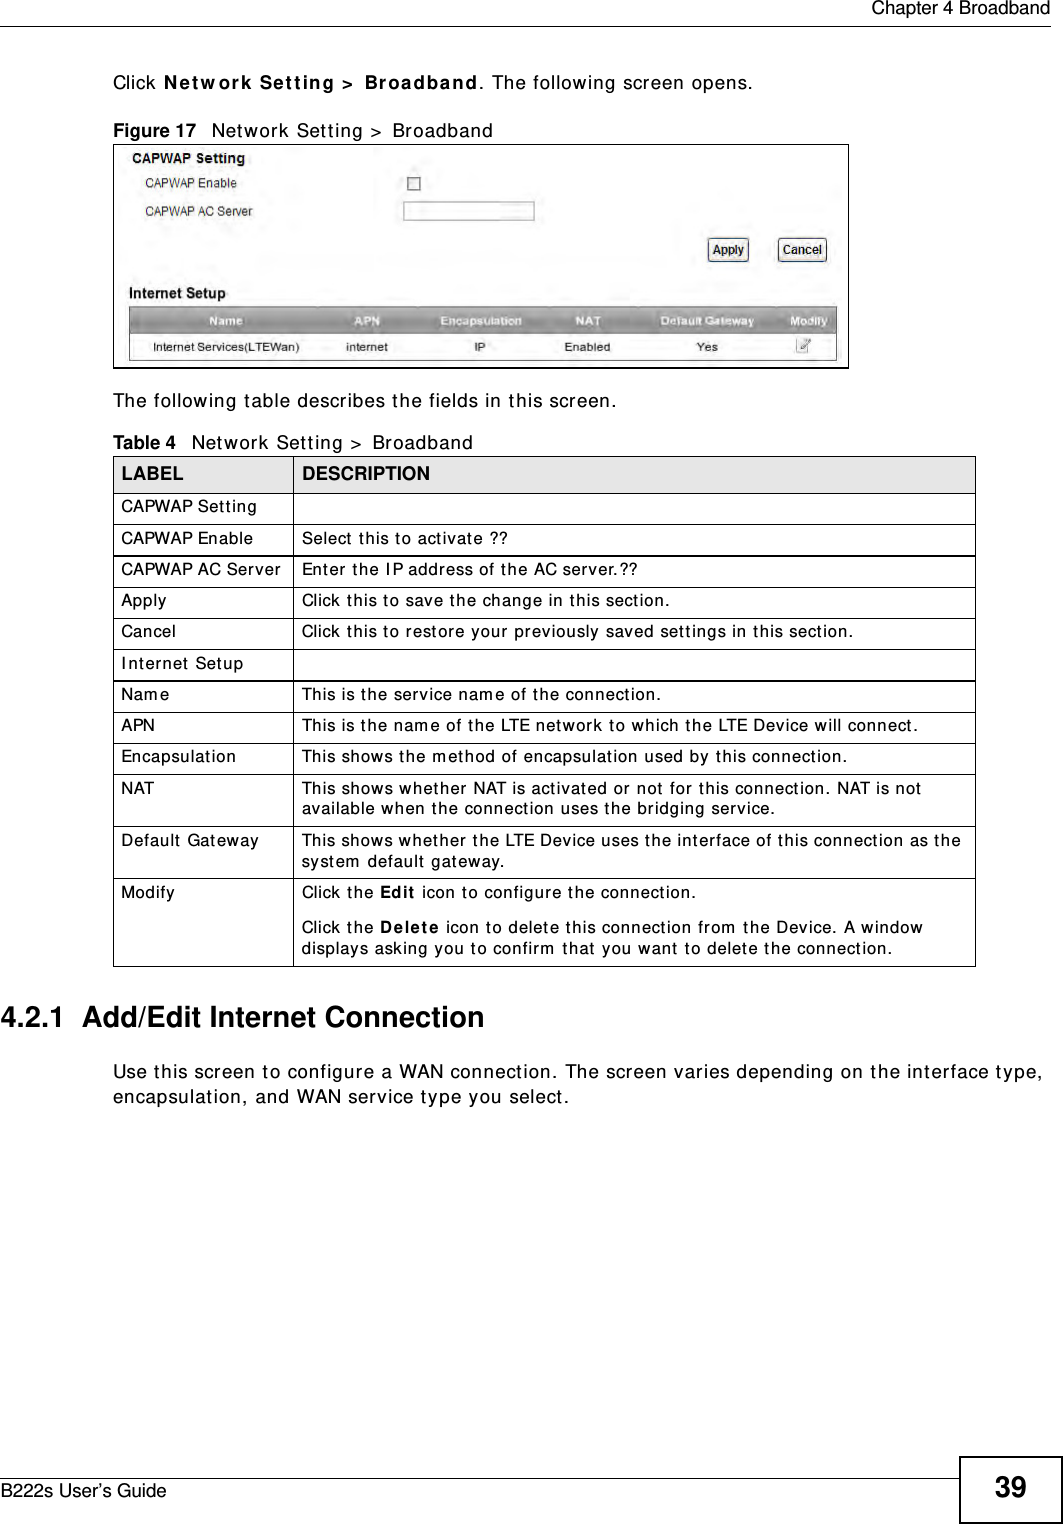  Chapter 4 BroadbandB222s User’s Guide 39Click N et w ork  Set t ing &gt;  Broadband. The following screen opens.Figure 17   Net work Set ting &gt;  BroadbandThe following t able describes t he fields in t his screen.4.2.1  Add/Edit Internet ConnectionUse t his screen to configure a WAN connect ion. The screen varies depending on the interface type, encapsulation, and WAN service ty pe you select . Table 4   Network Set t ing &gt;  BroadbandLABEL DESCRIPTIONCAPWAP Set t ingCAPWAP Enable Select  t his t o activat e ??CAPWAP AC Server Enter t he I P address of t he AC server.??Apply Click t his to save t he change in this section.Cancel Click t his t o restore your previously saved set t ings in this sect ion.I nter net Set upNam e This is t he serv ice nam e of t he connect ion.APN This is t he nam e of t he LTE net work t o which t he LTE Device will connect.Encapsulat ion This show s t he m et hod of encapsulation used by t his connect ion. NAT This shows whet her  NAT is act ivated or not for this connect ion. NAT is not  available when t he connect ion uses t he bridging serv ice.Default  Gat eway This show s whet her the LTE Device uses the int erface of t his connect ion as t he system  default gat eway.Modify Click the Edit  icon t o configure t he connection.Click the D e le t e  icon to delet e this connect ion from  t he Device. A window  displays asking y ou t o confirm  t hat you want  to delete t he connection.